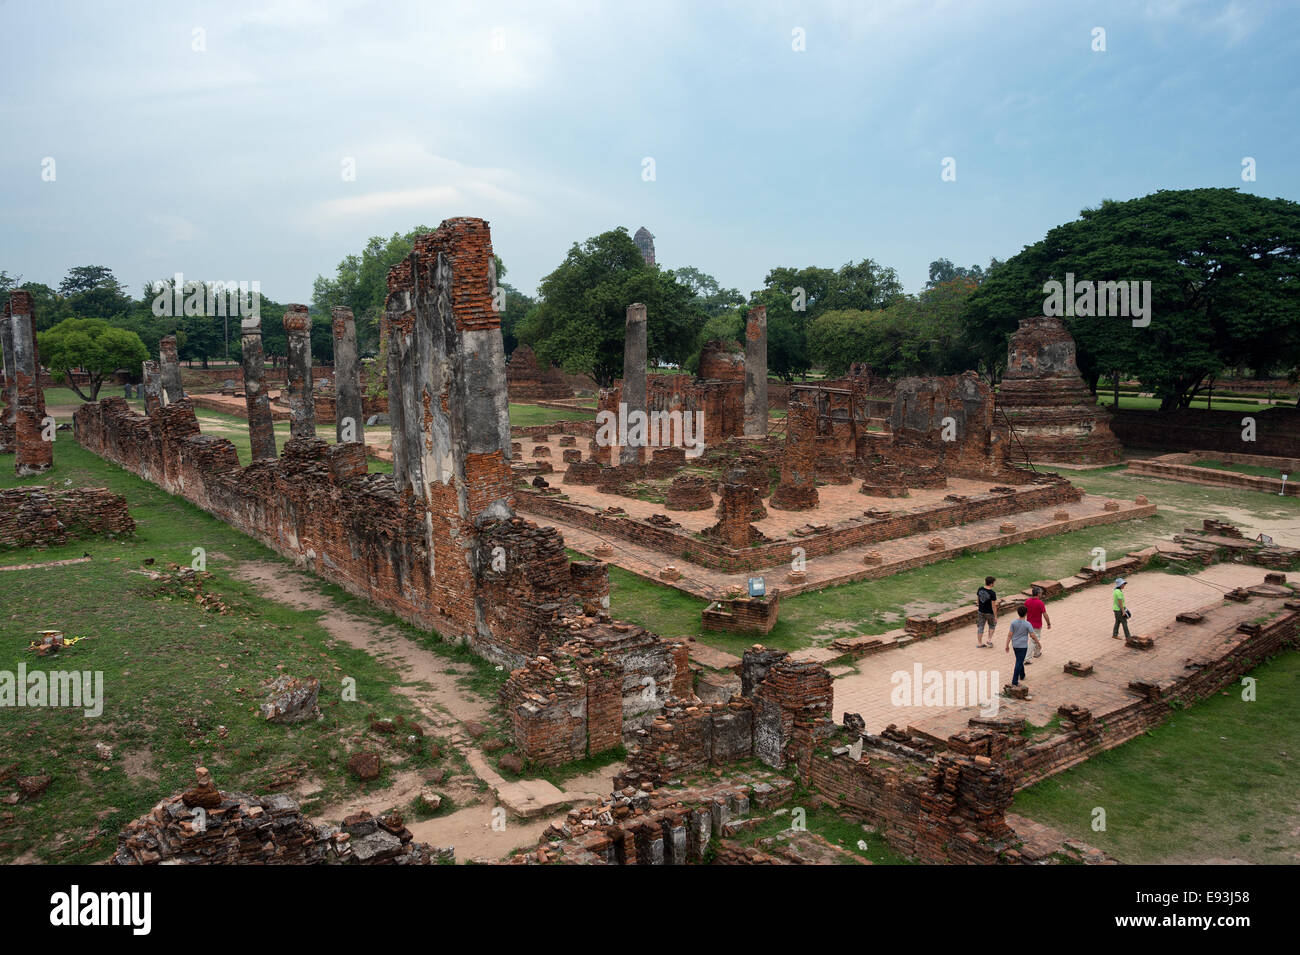 Tourists walk through the famous ruins at Wat Phra Si Sanphet in Ayutthaya, Thailand Stock Photo